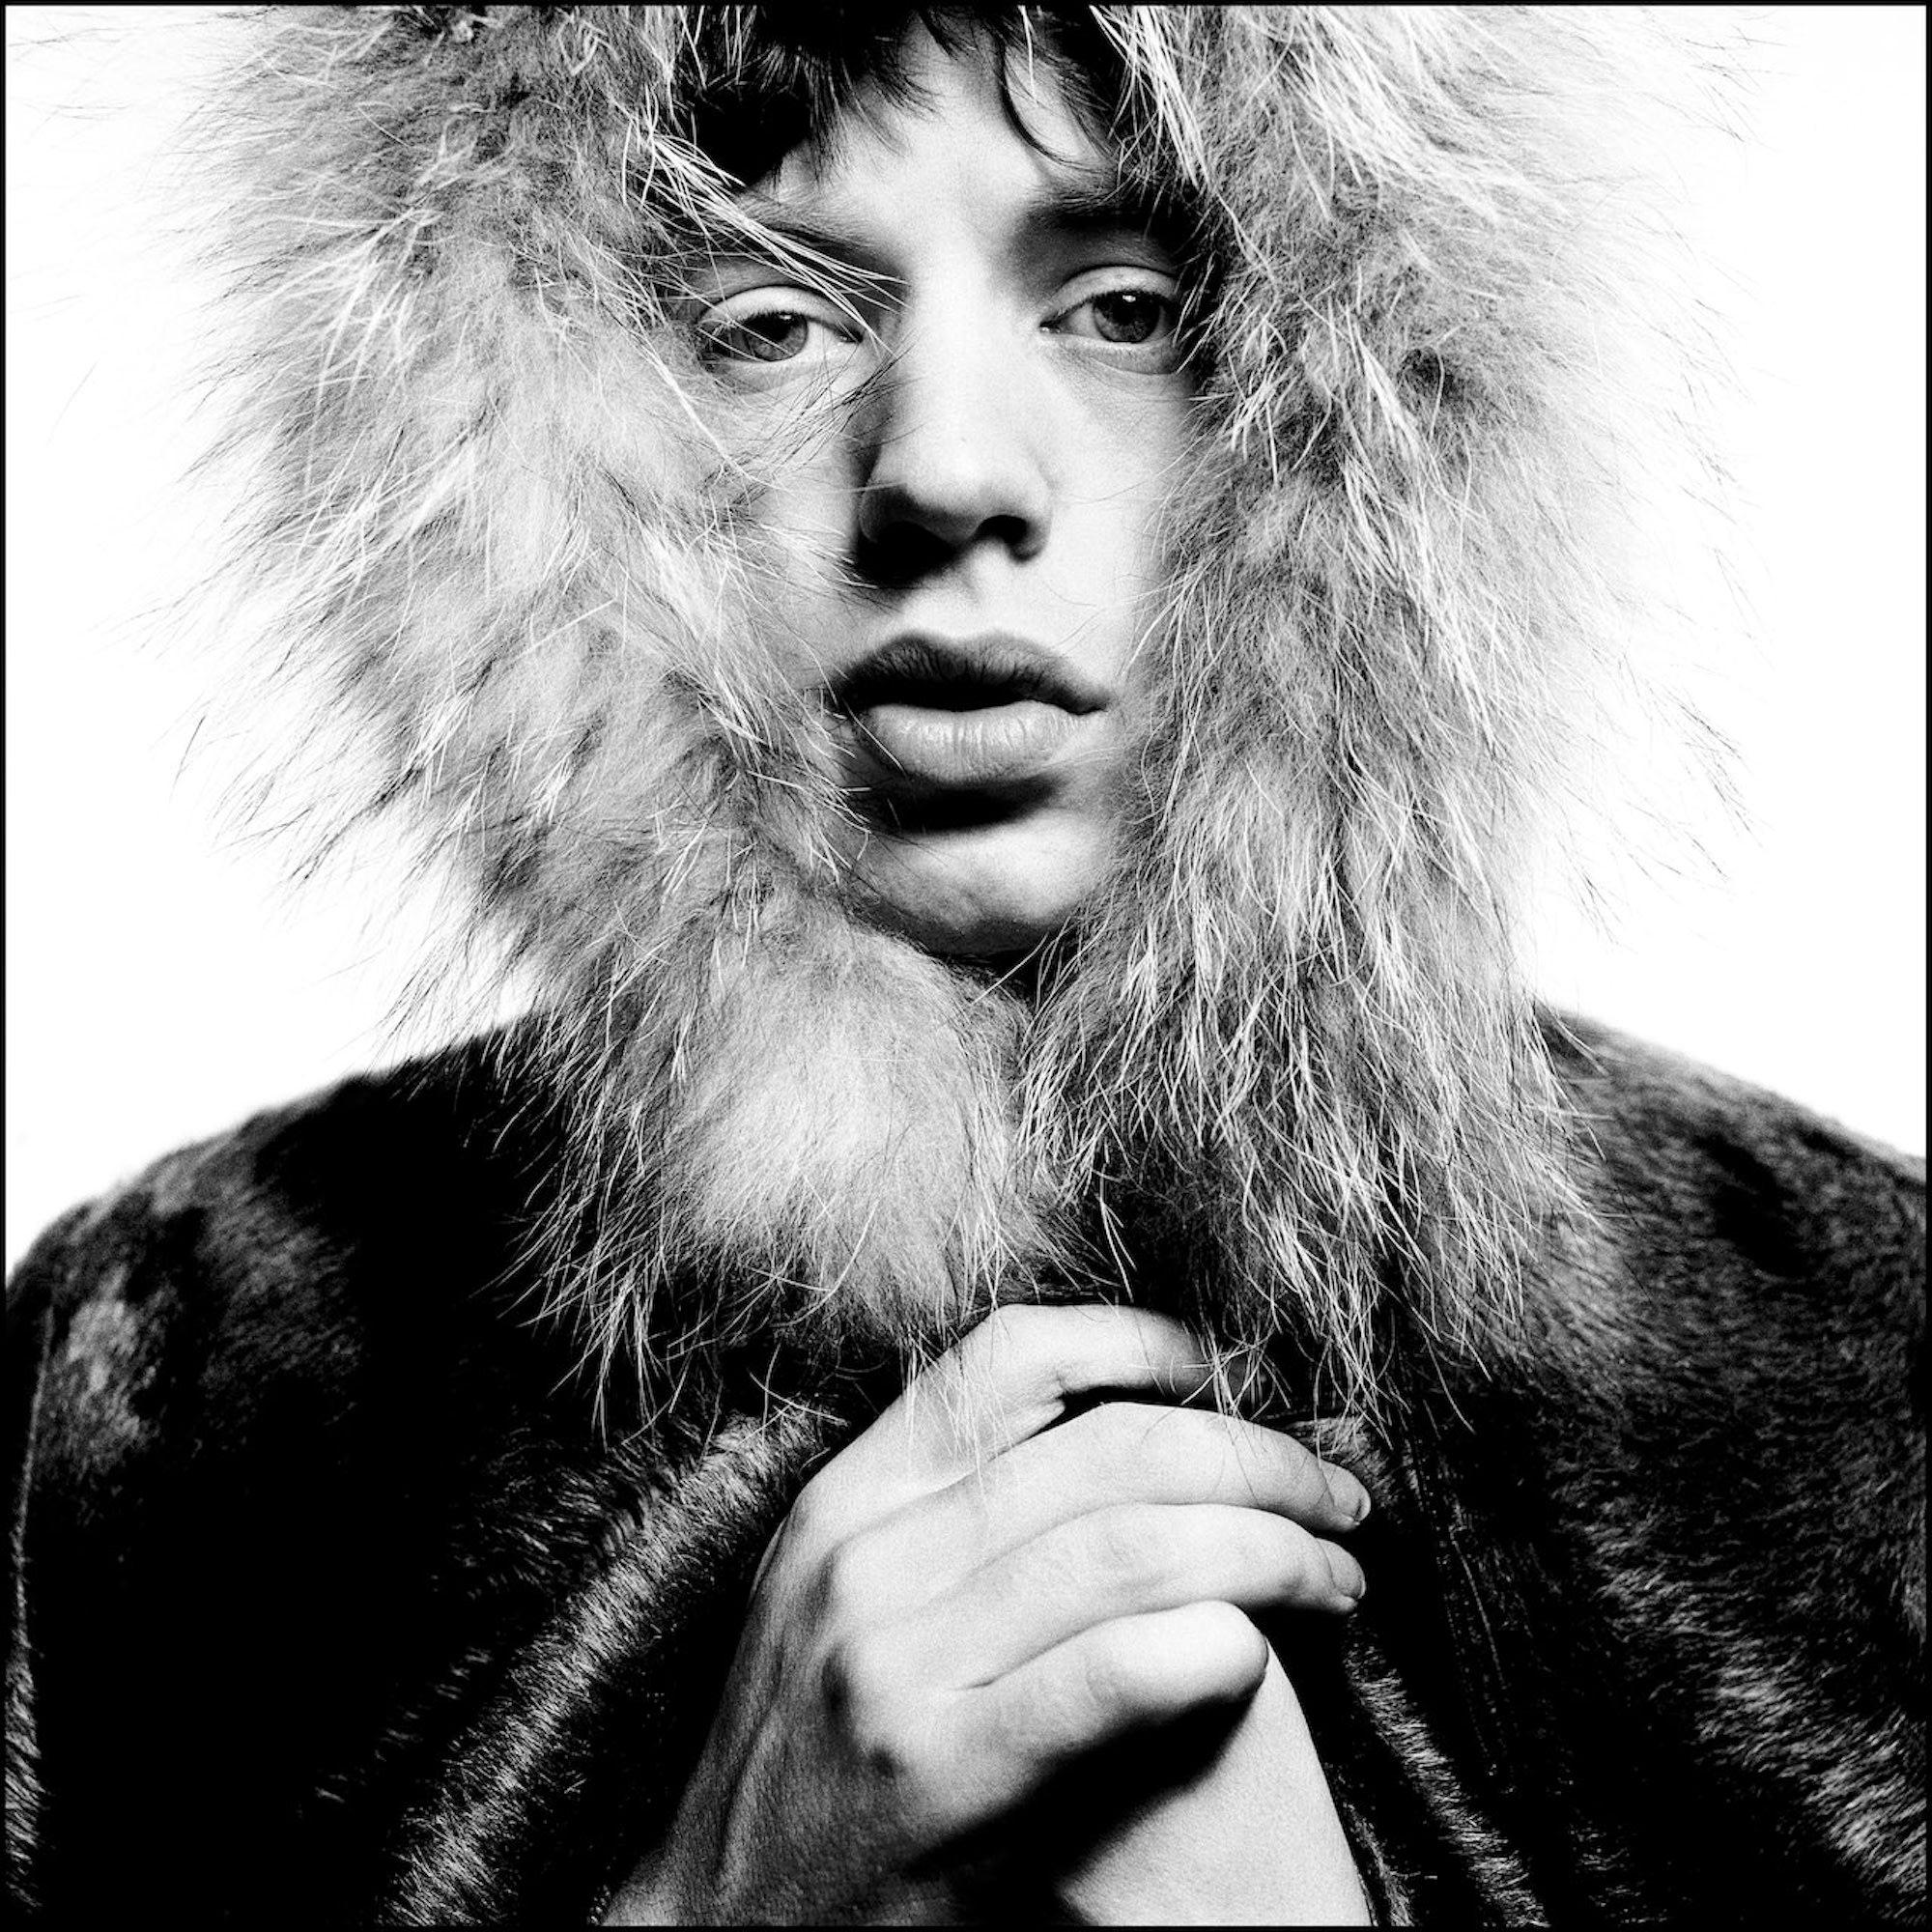 David Bailey Black and White Photograph - Mick in Fur Hood